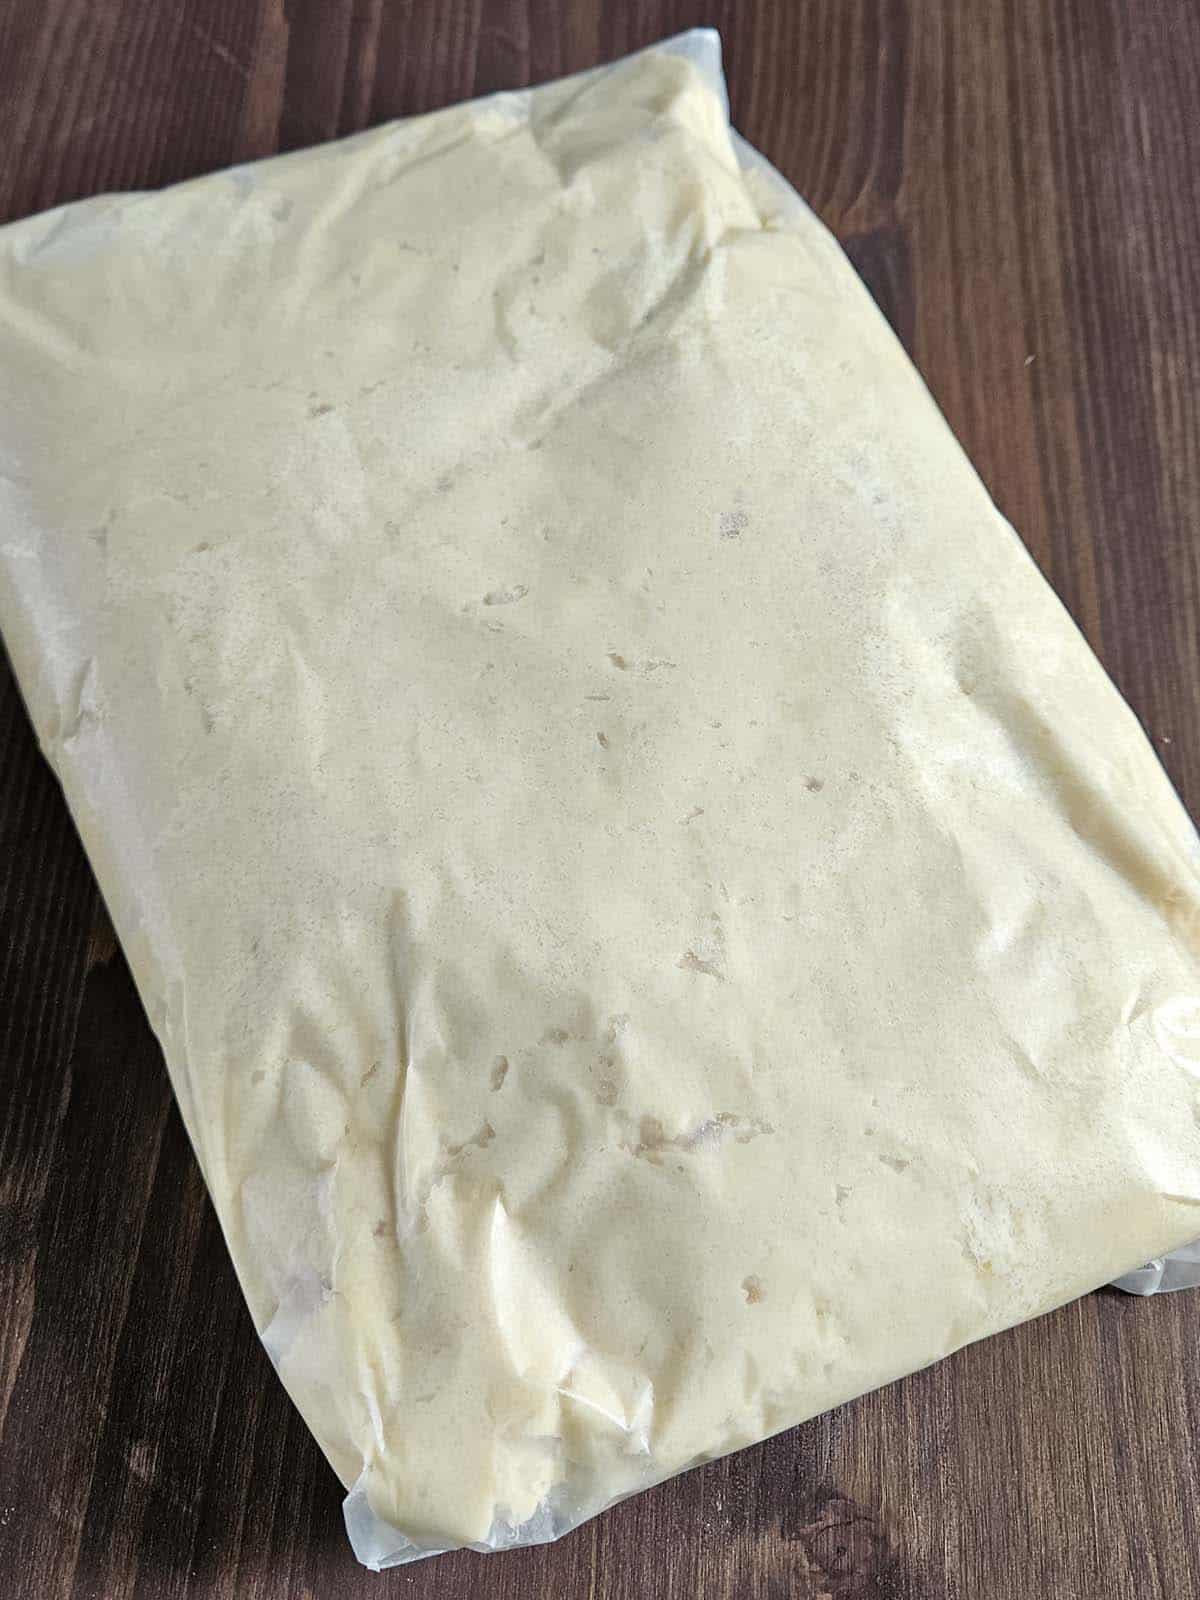 Cookie dough wrapped in waxed paper.